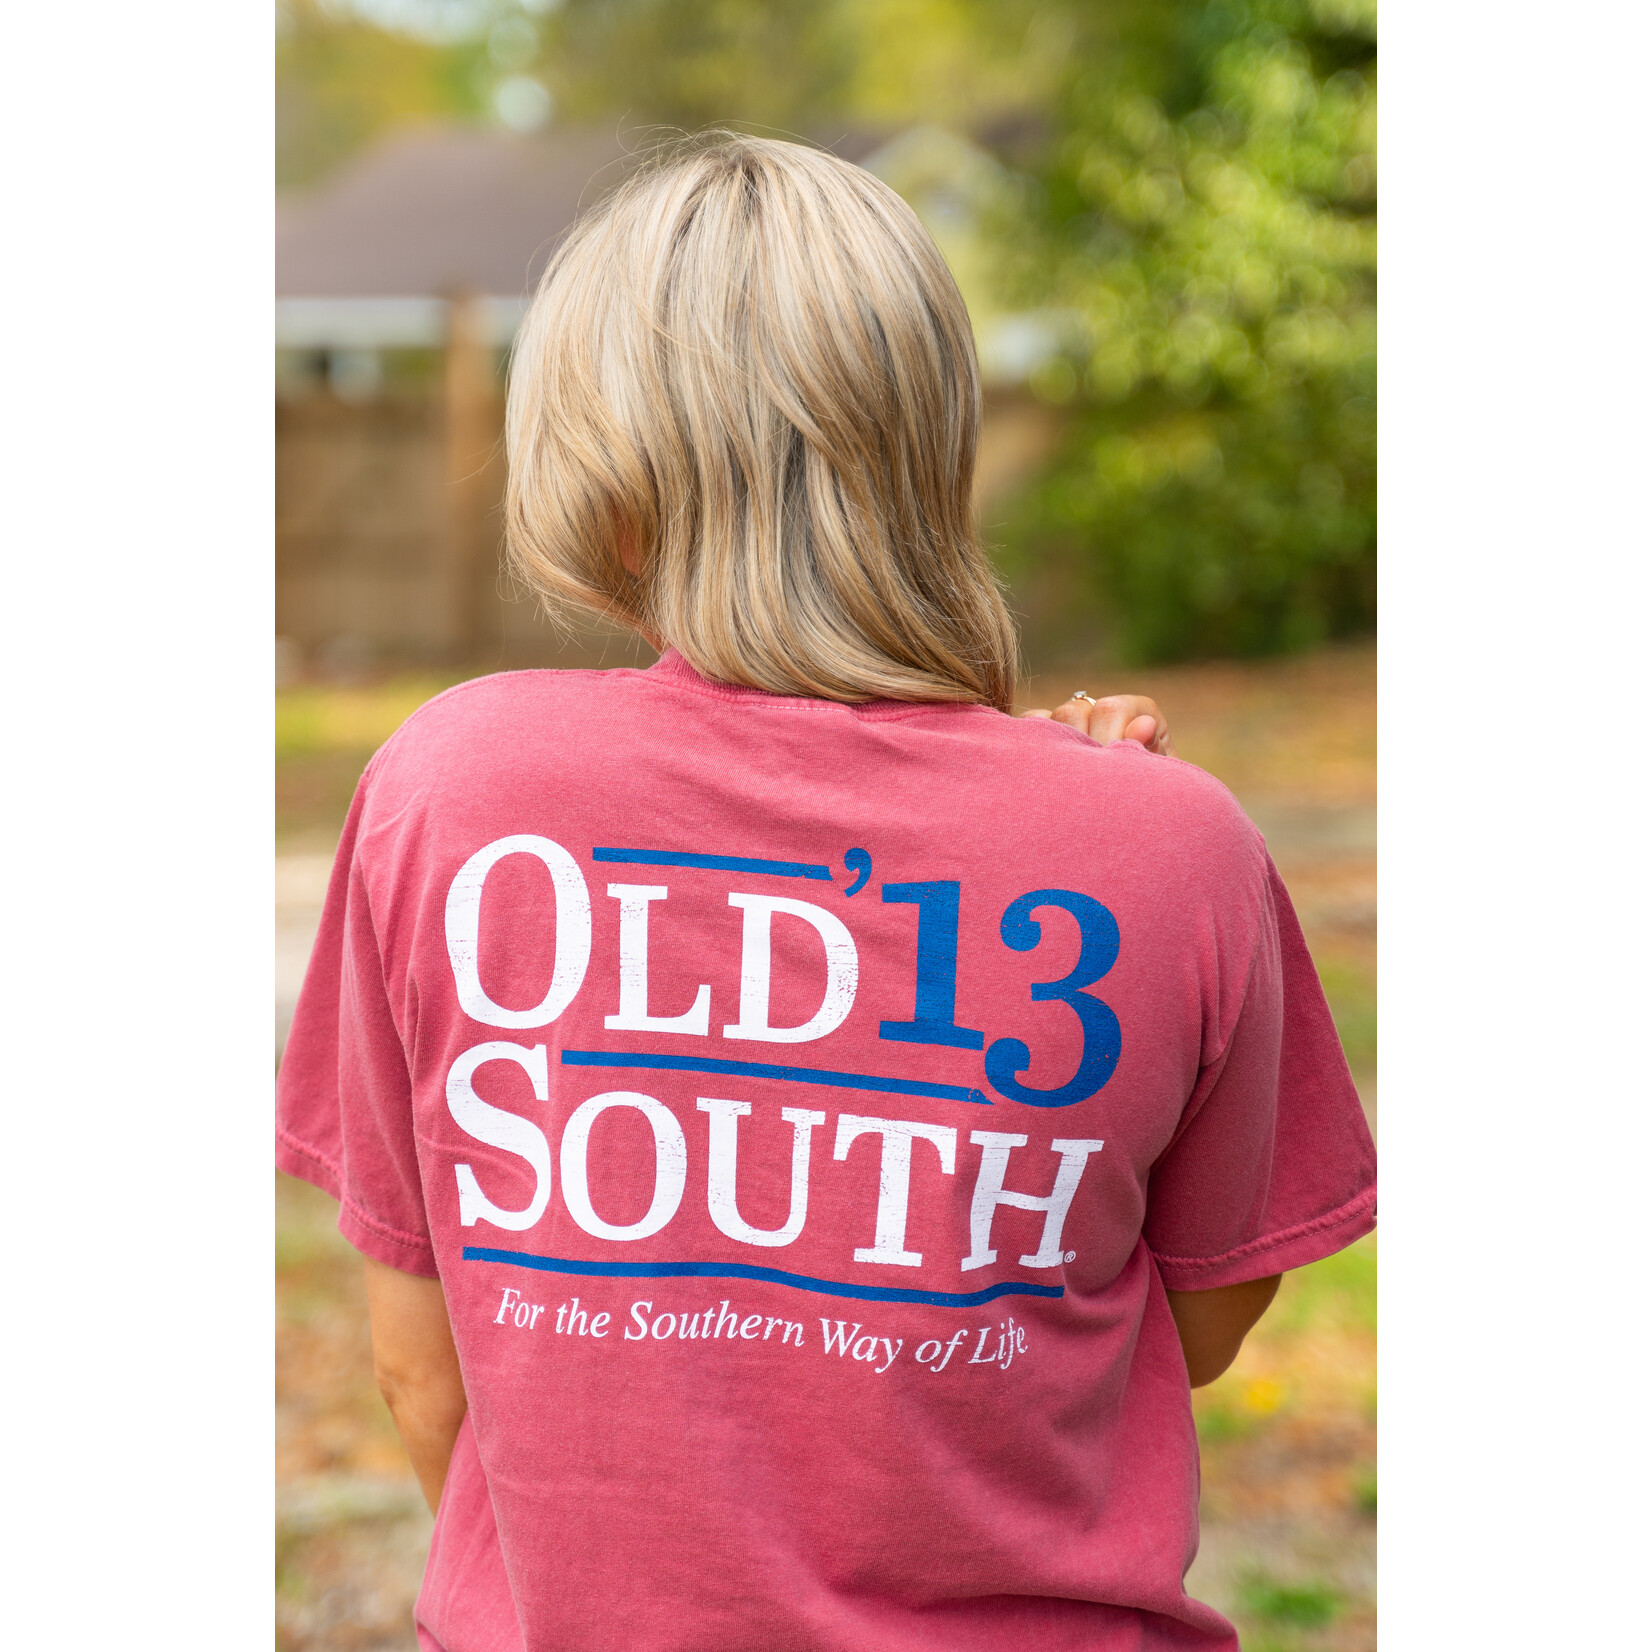 Old South Apparel Old South Apparel Campaign Logo S/S TEE Shirt